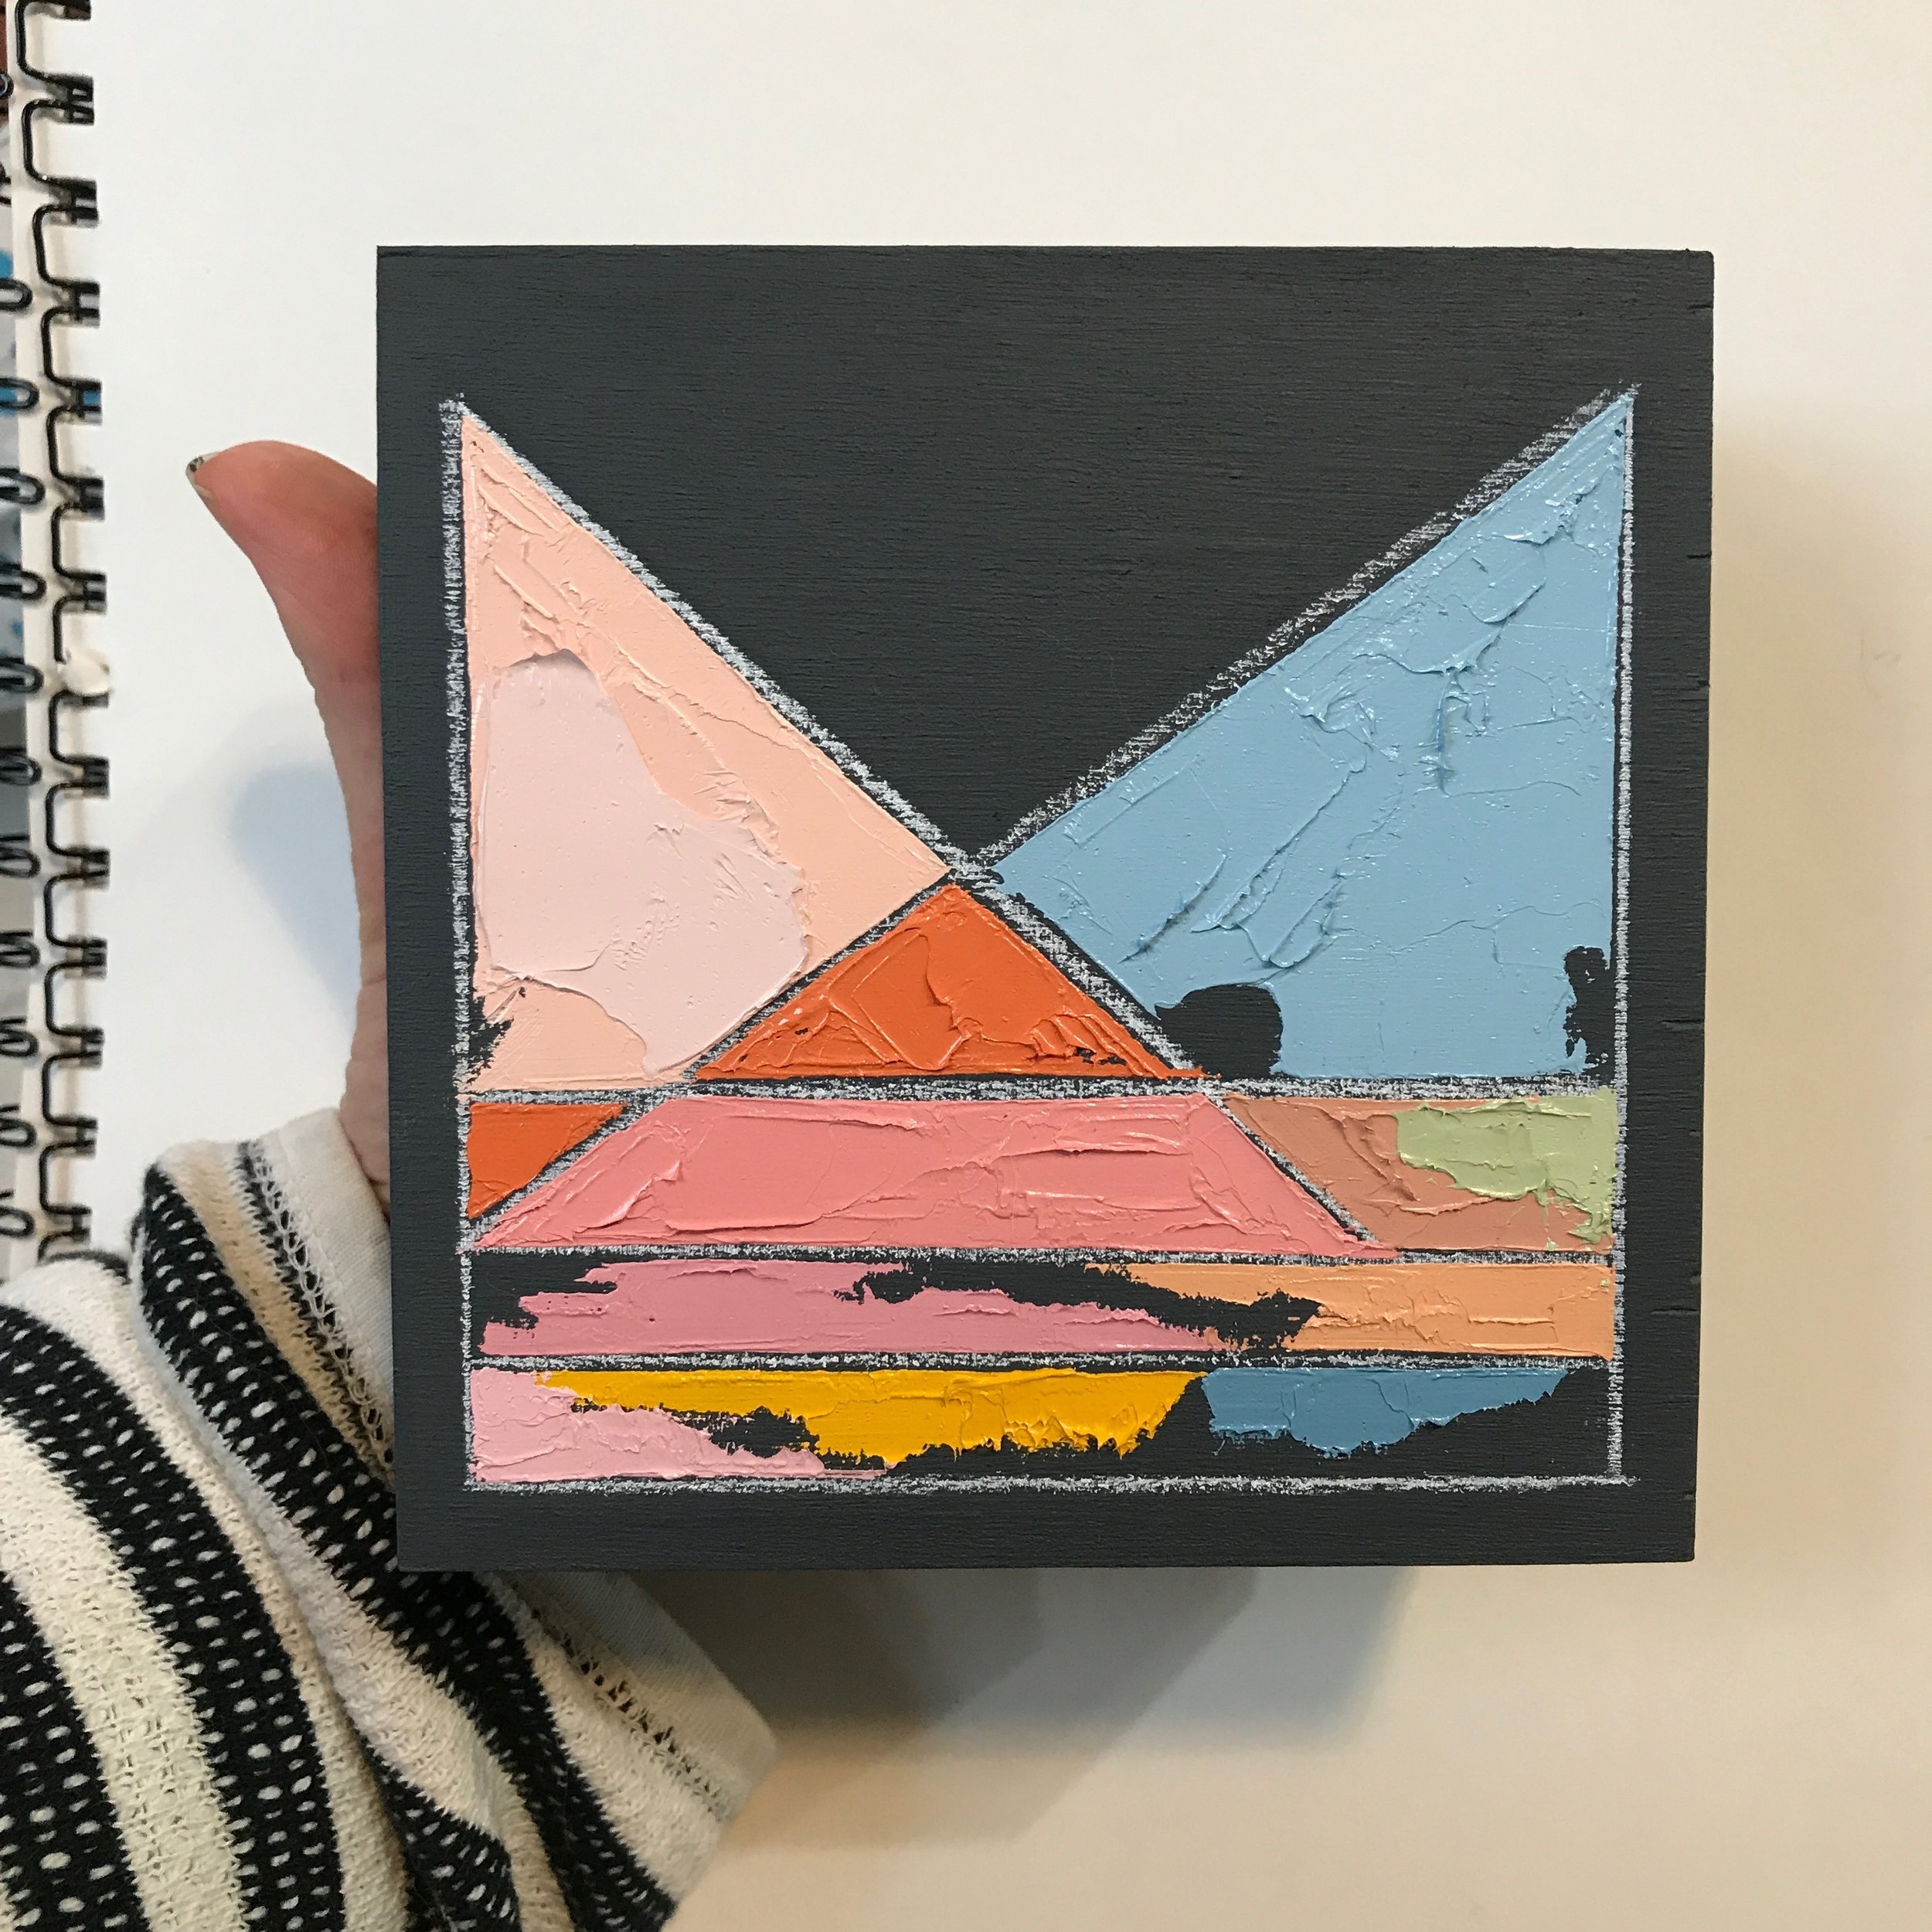  Mia Cross,  In the Southwest With You,  oil, acrylic and colored pencil on panel, 5”x5” 